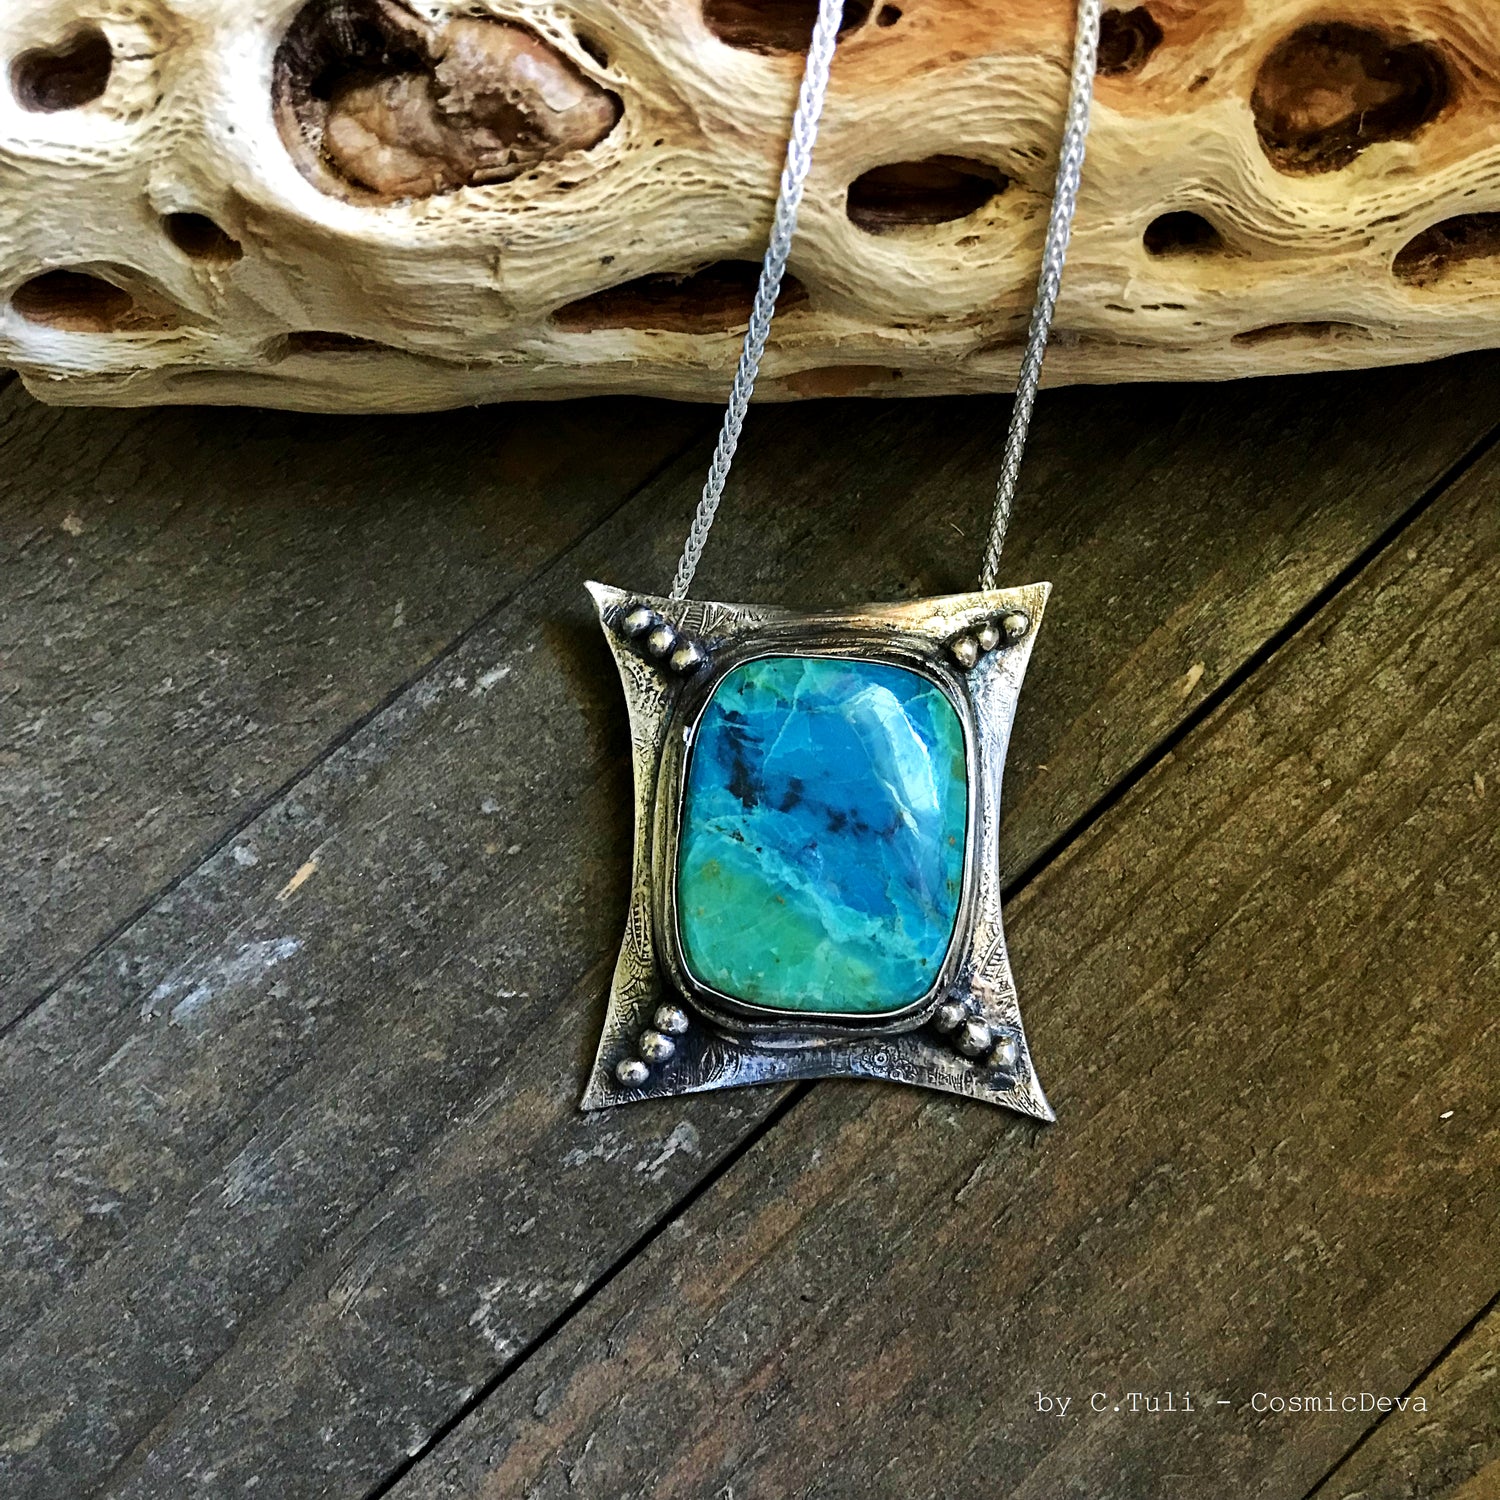 Sterling Silver Pendant Chrysocolla Necklace . One of a kind fully handmade sterling silver art jewelry necklace with a spectacular vibrant blue green Chrysocolla (a.k.a "Peruvian Turquoise") stone. The polished sterling silver pendant was oxidized to give it an antique look.- Handcrafted - CosmicDeva